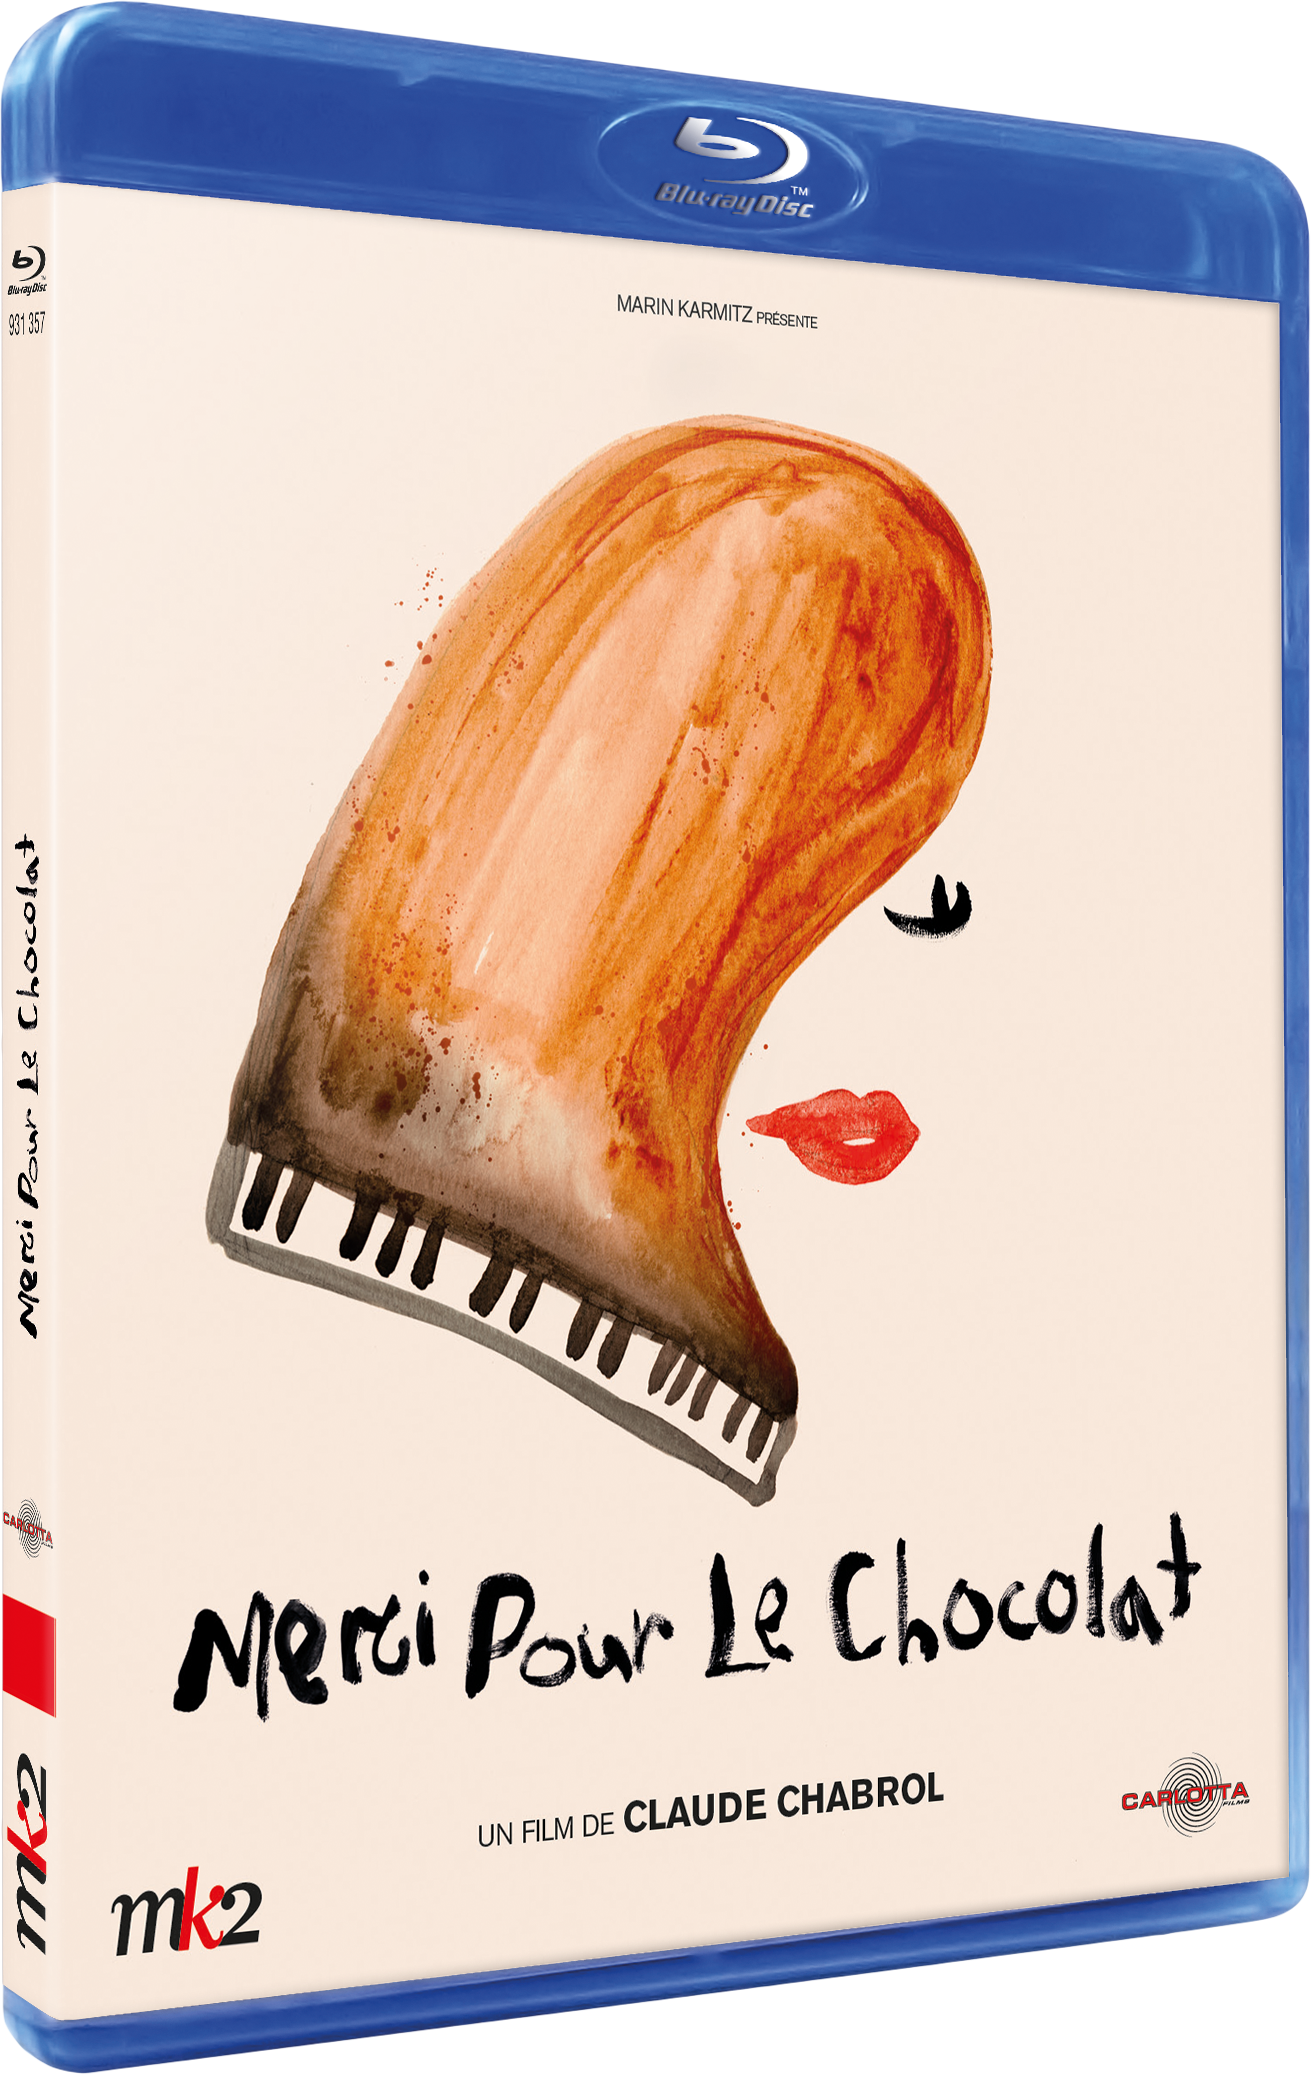 Thank you for Claude Chabrol's chocolate